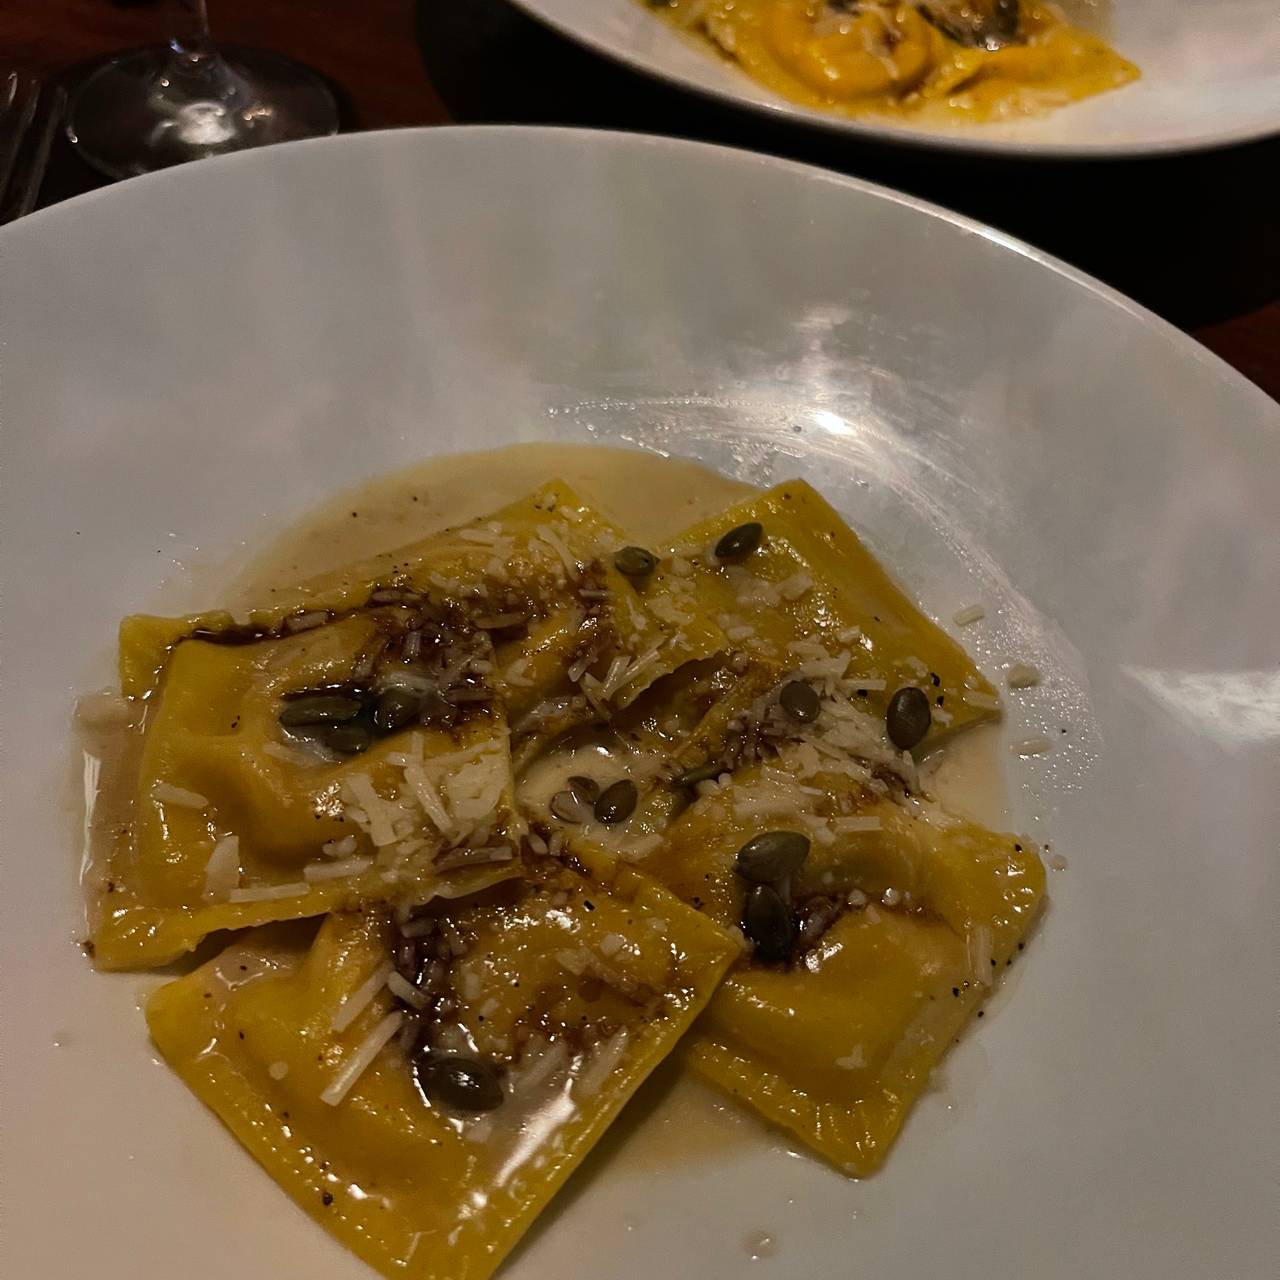 Luca Review - As Comforting As A Big Bowl of Pasta